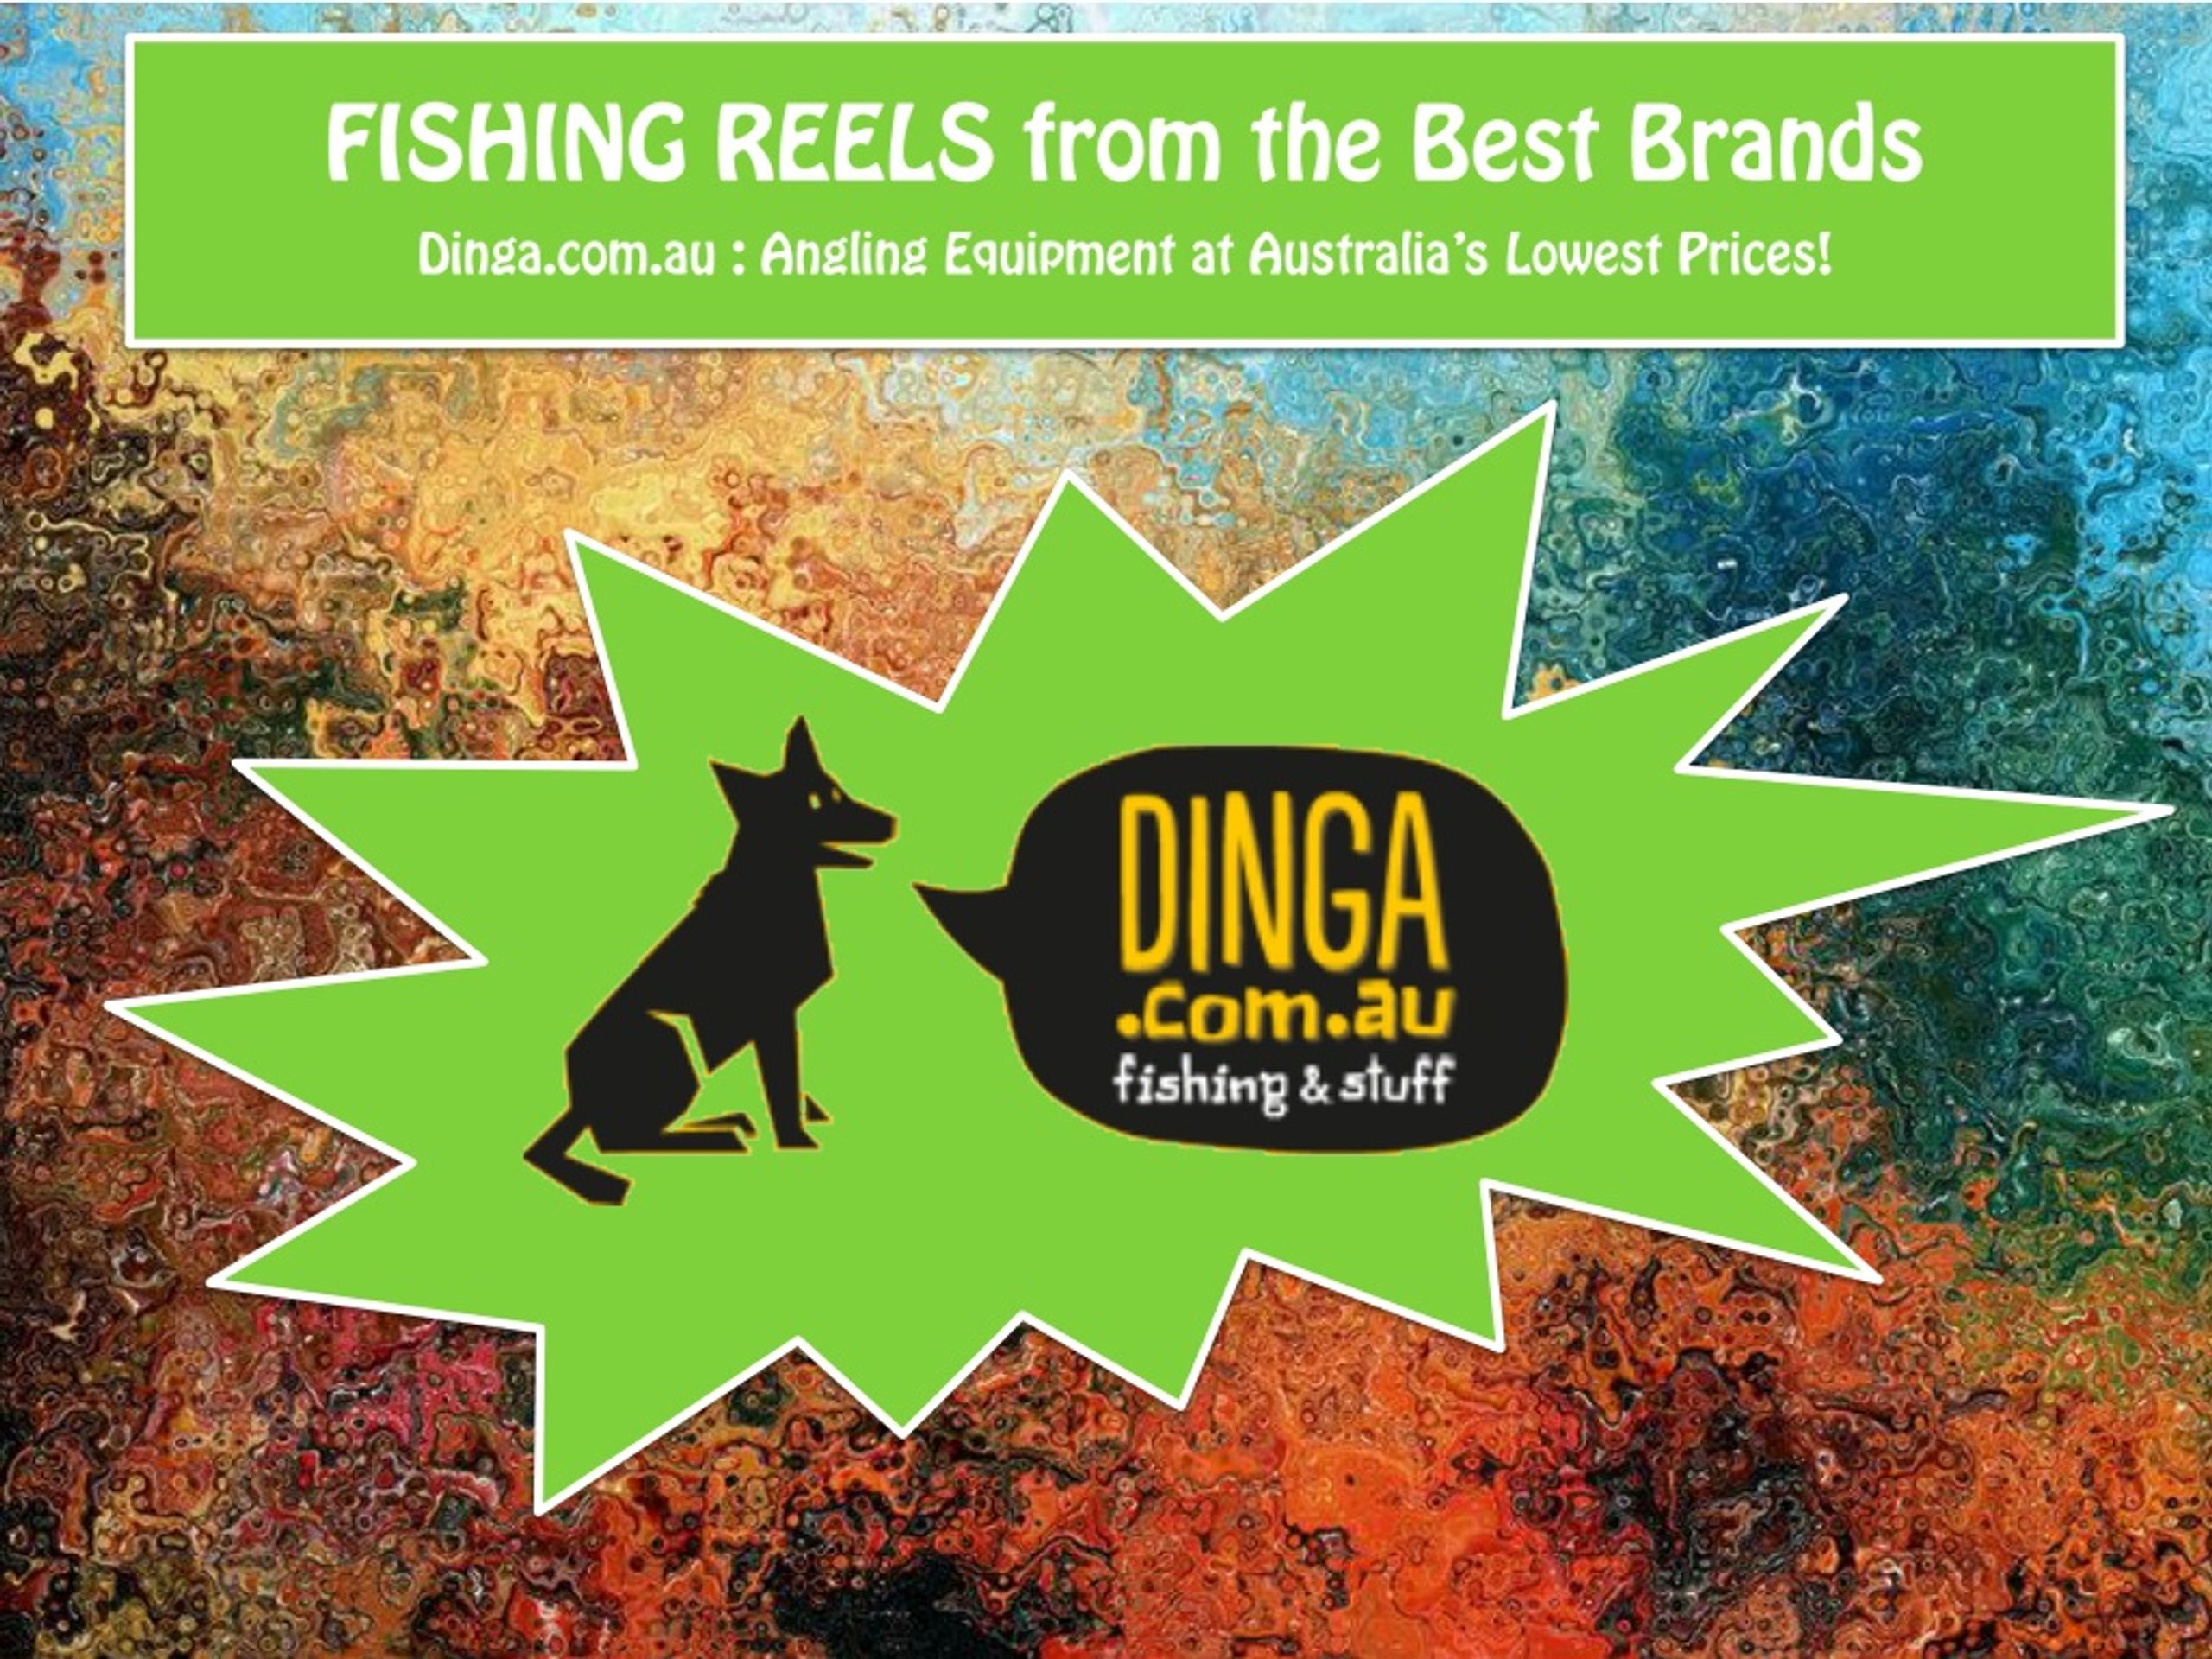 PPT - FISHING REELS from the Best Brands PowerPoint Presentation